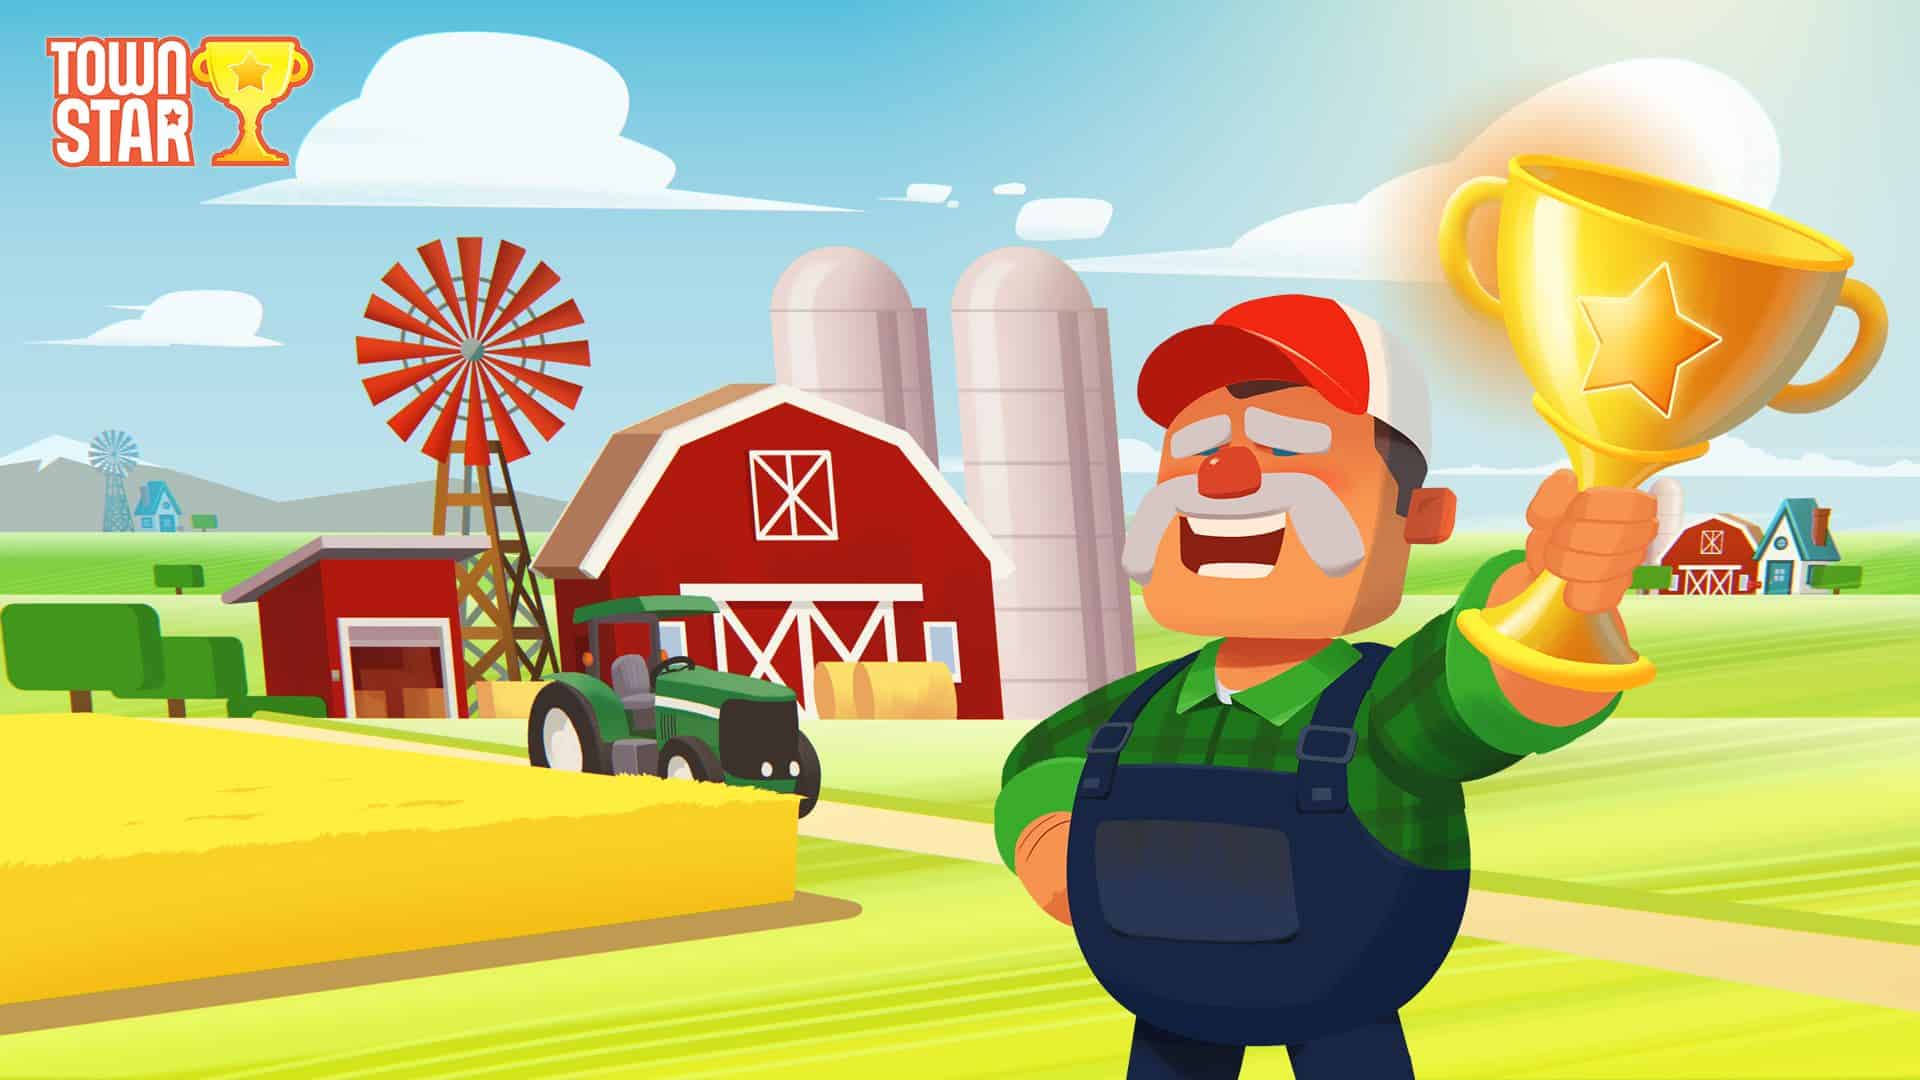 Happy February, egamers! Town Star, a P2E farming simulation game developed by Gala Games, offers all its active community members and players the chance to qualify for great non-fungible token (NFT) rewards!